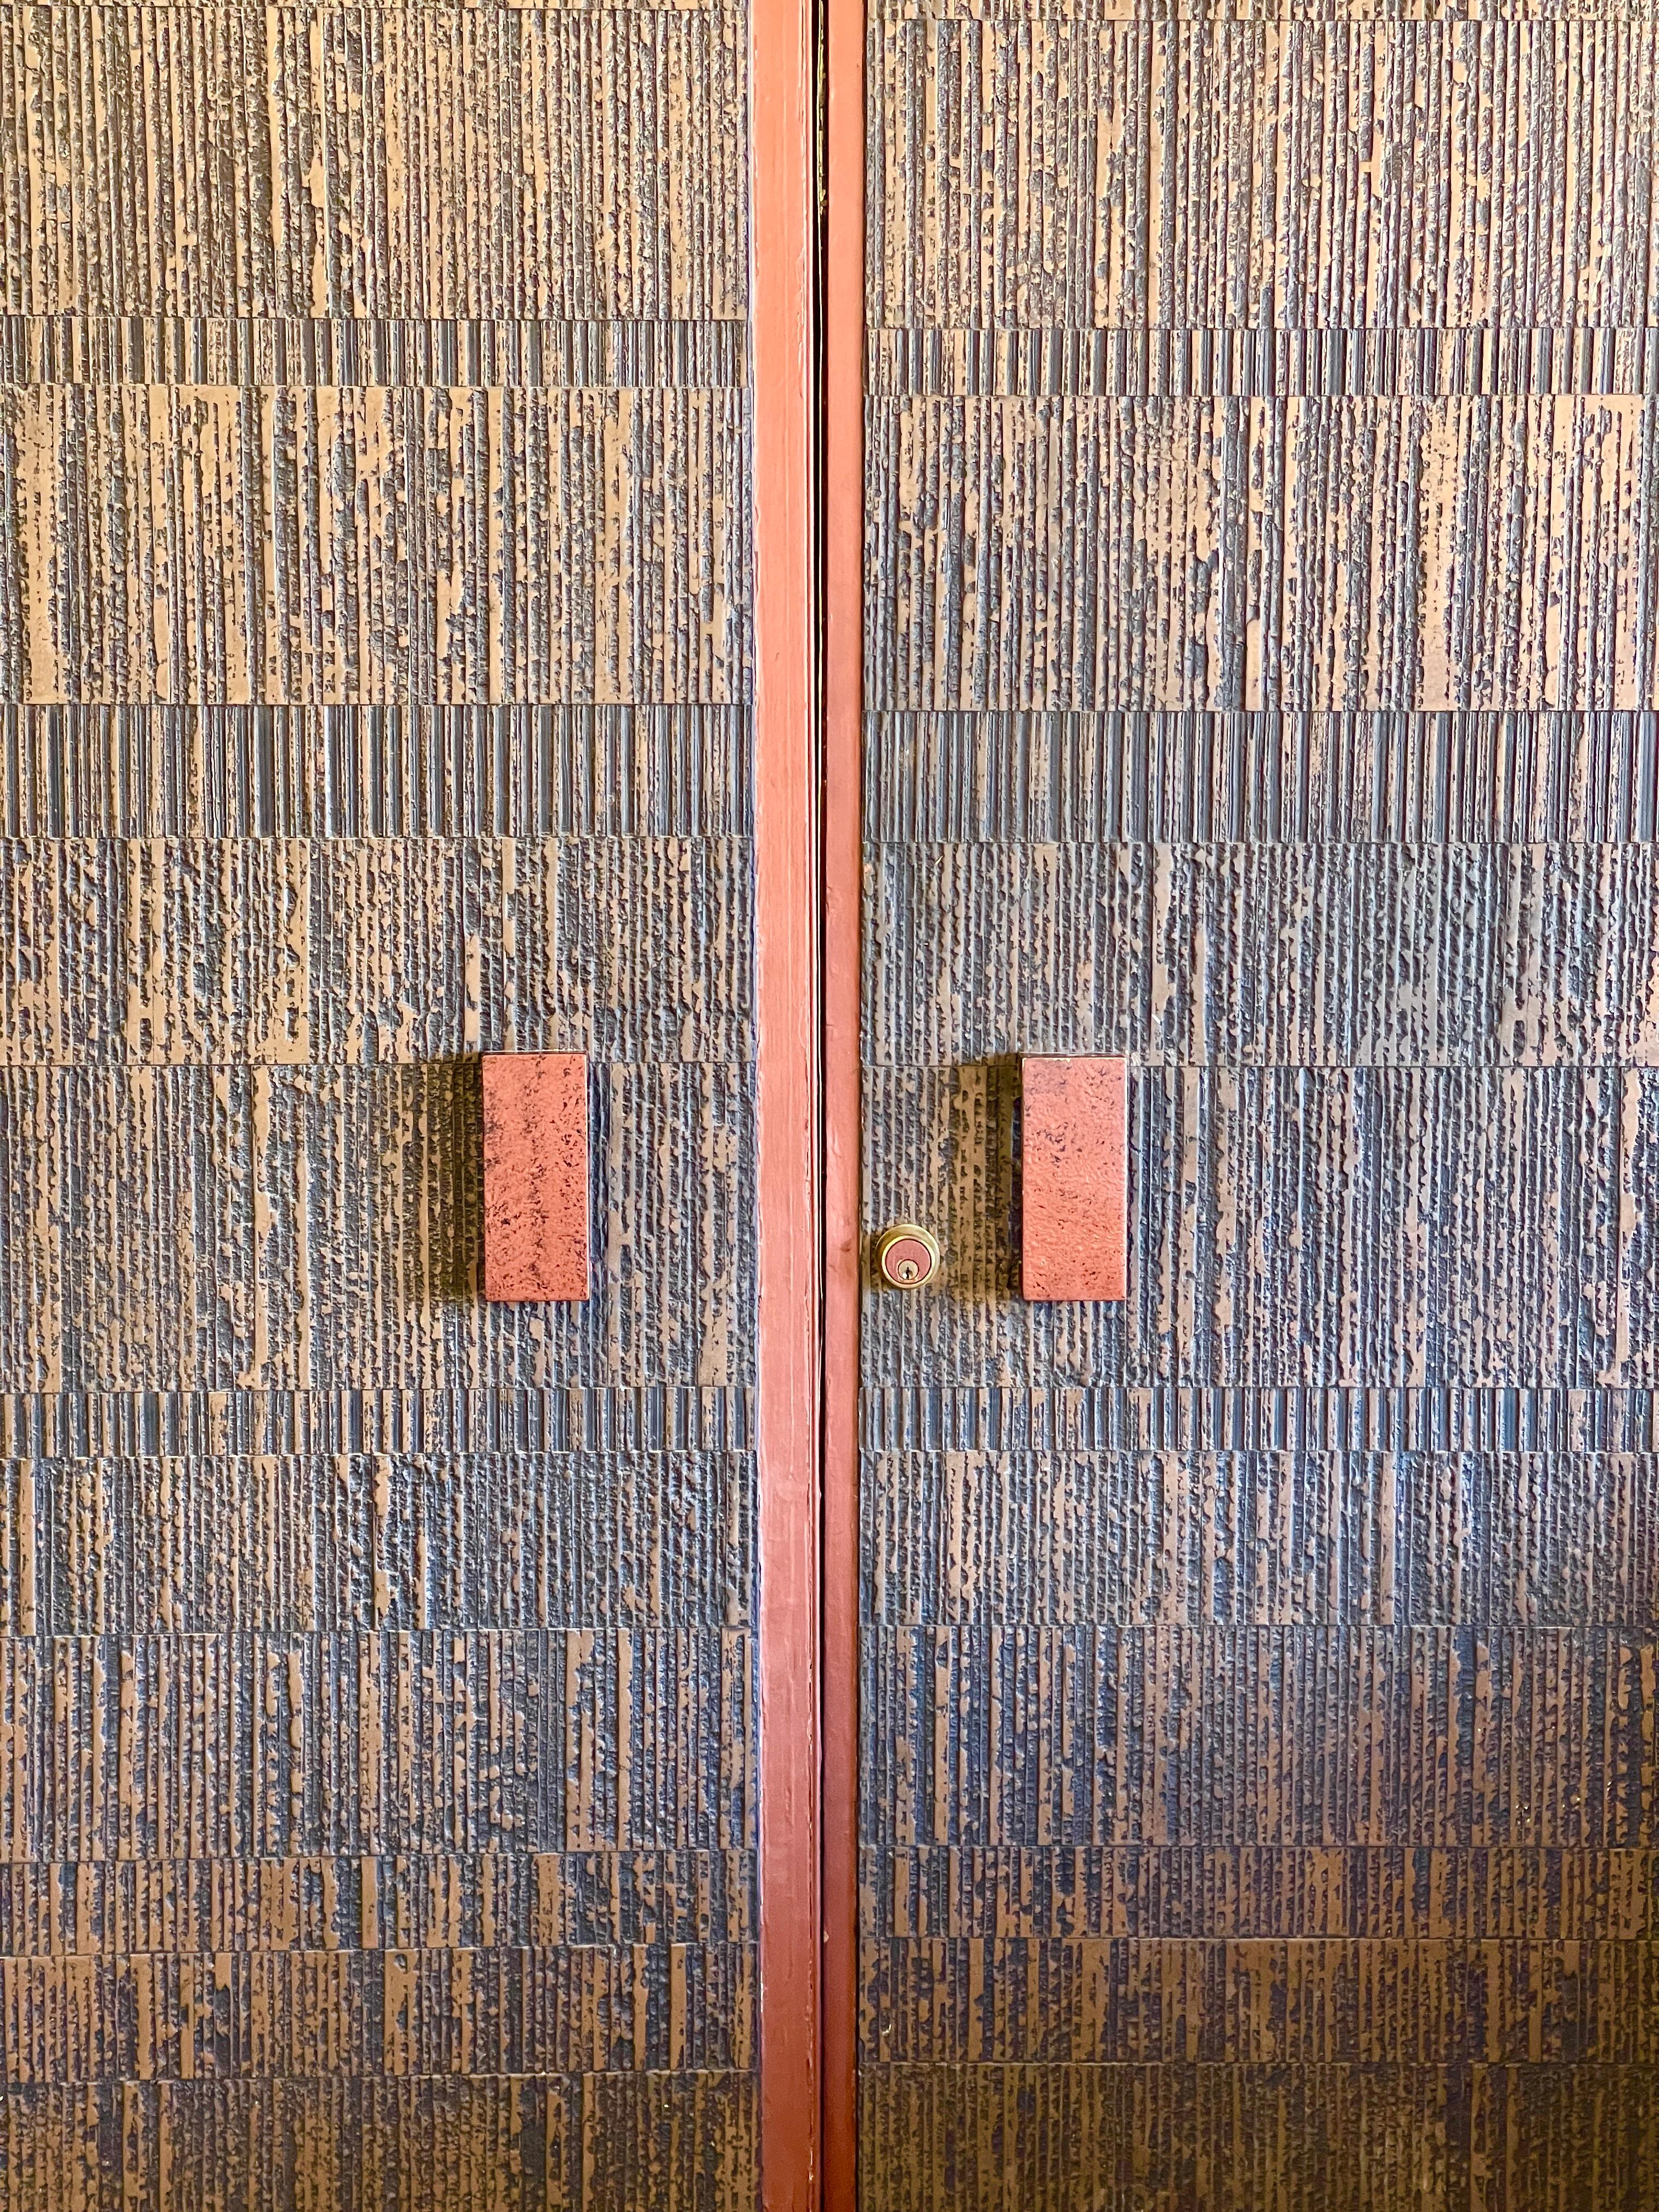 Great set of Bonded Bronze Brutalist doors by Forms and Surfaces. These doors have a wonderful patina. In a wood frame. These doors were custom ordered from the estate and are unusually sized at 83 inches wide. They are 94 inches tall. The wood